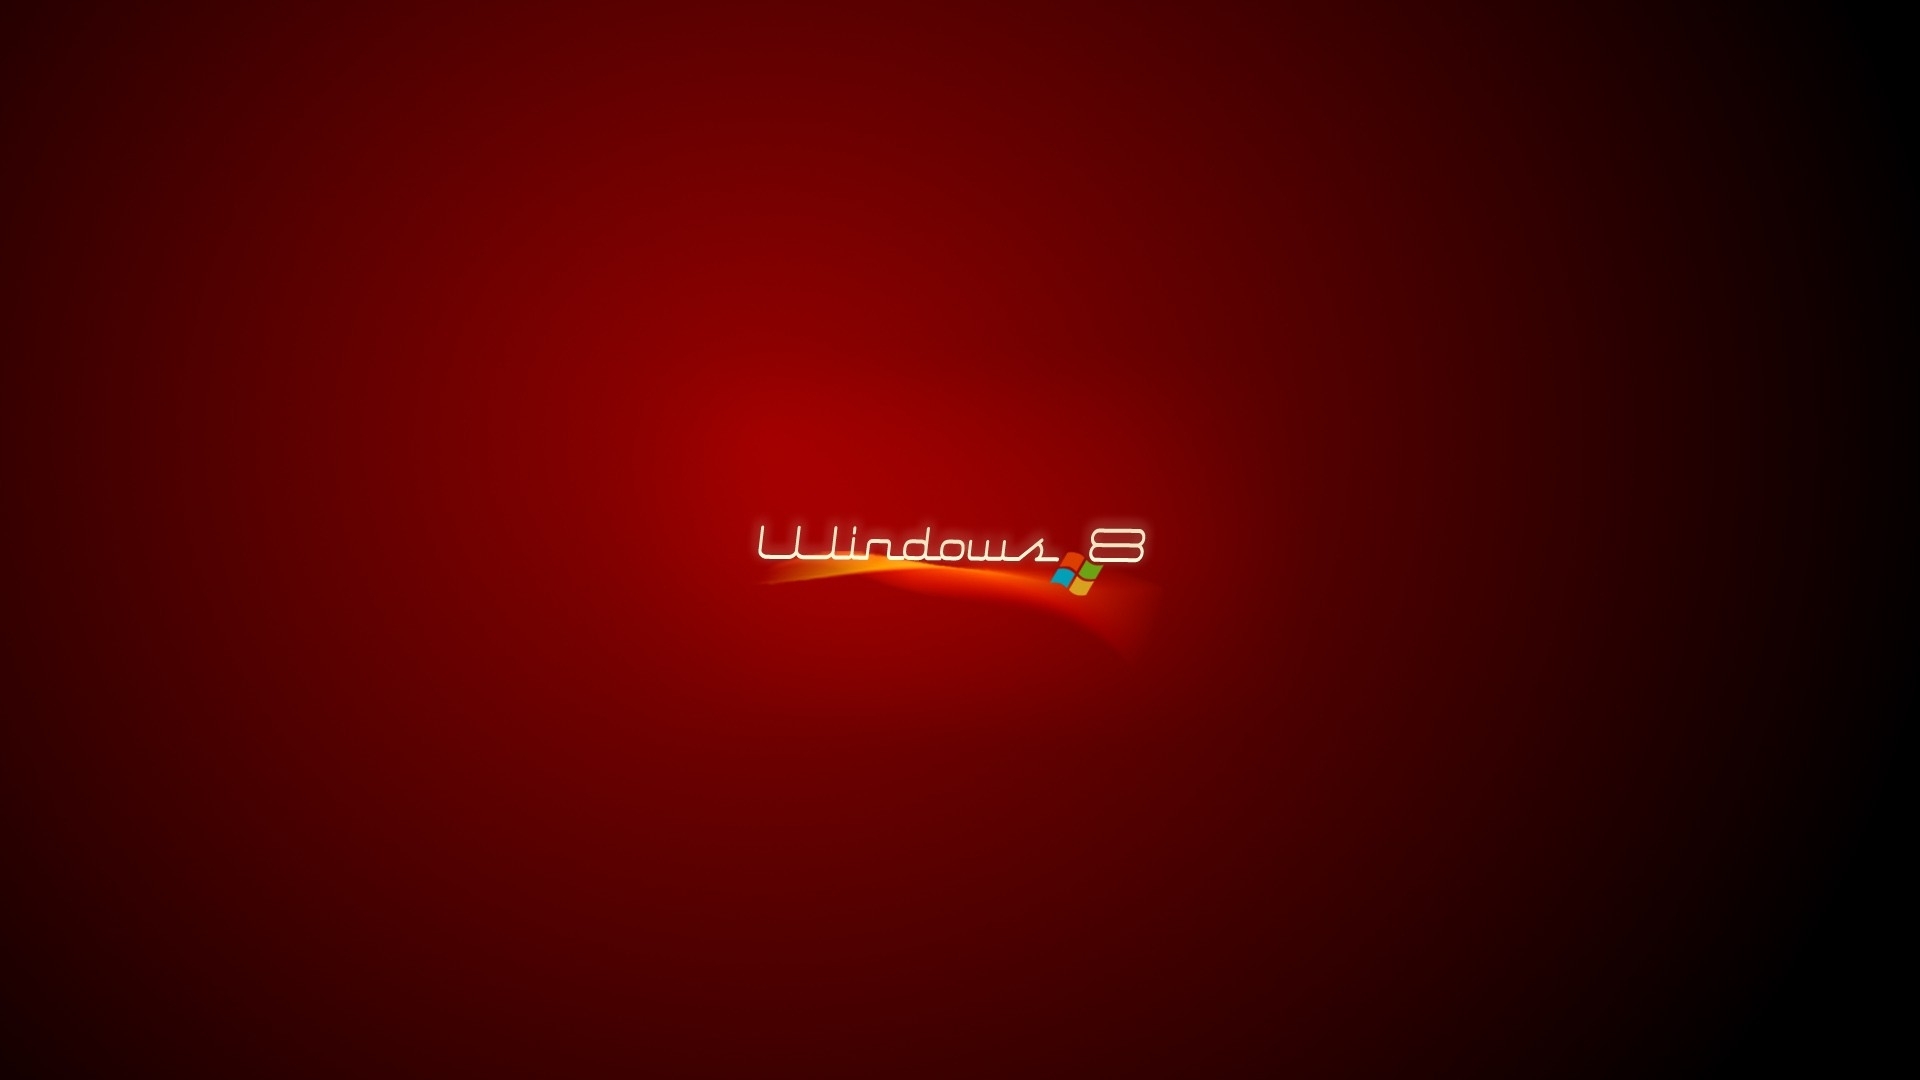 Windows 8 Wallpapers, Pictures, Images Full Hd Wallpapers For Windows 8 1920x1080